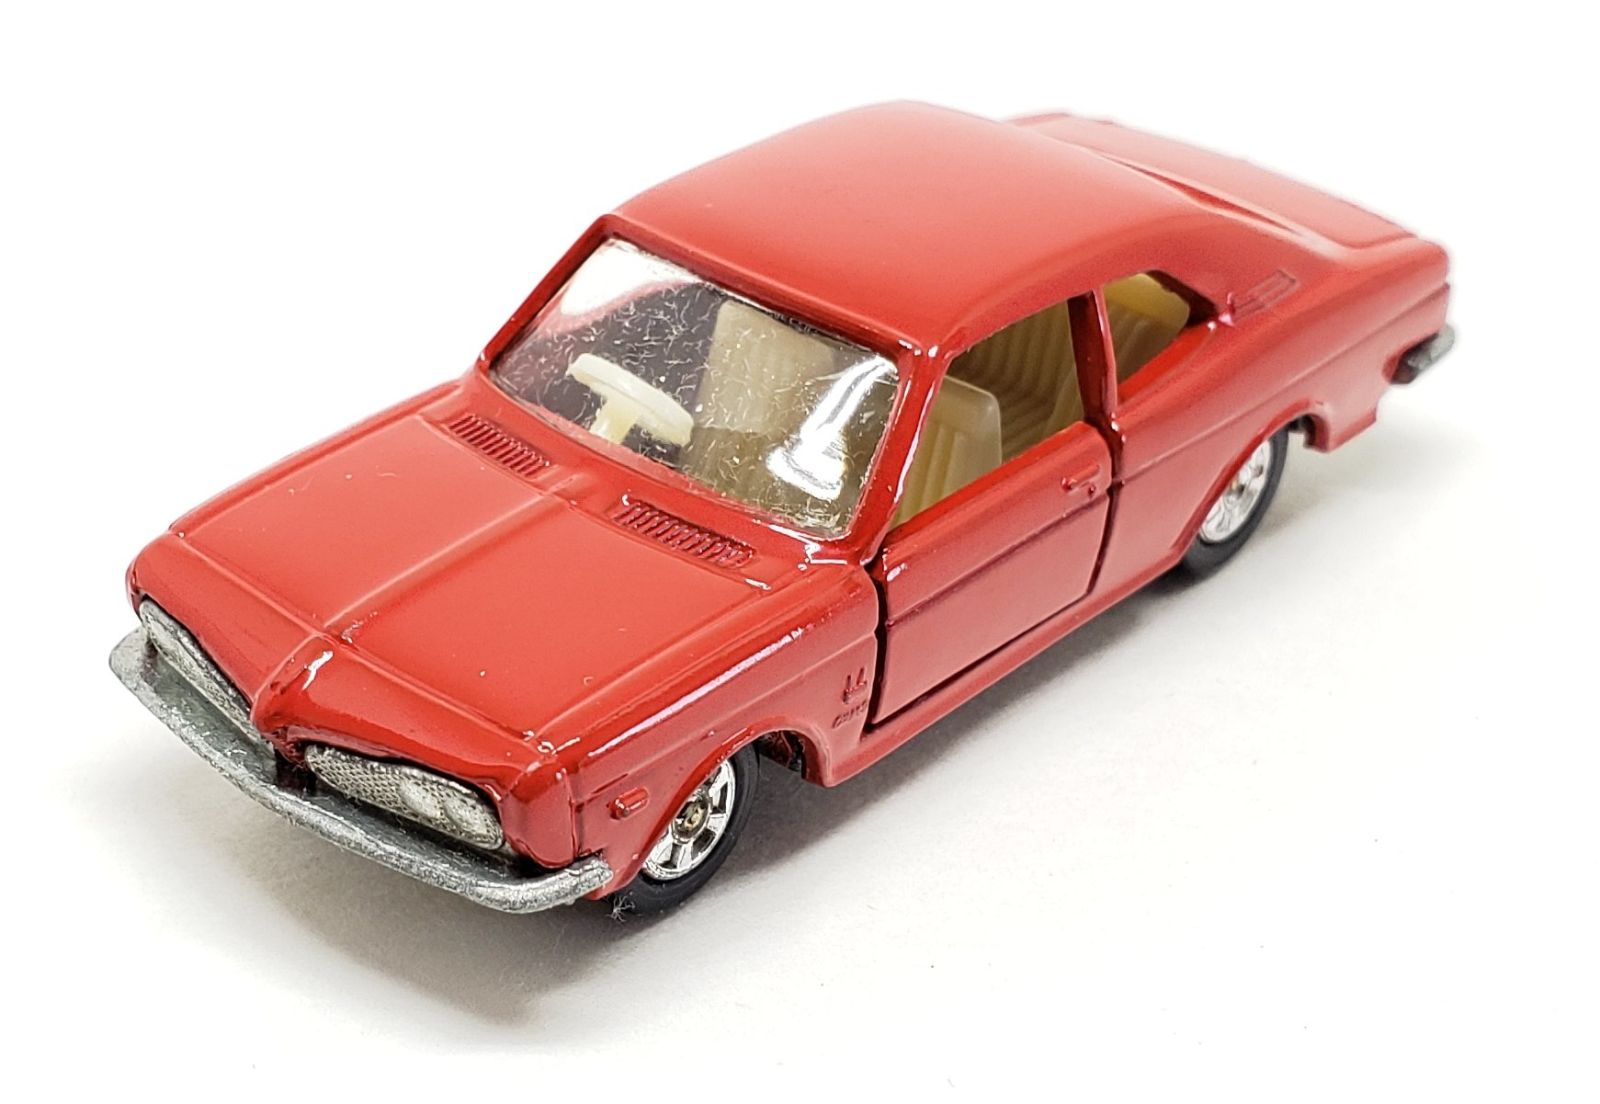 Illustration for article titled [REVIEW] Tomica Honda 1300 Coupe 9